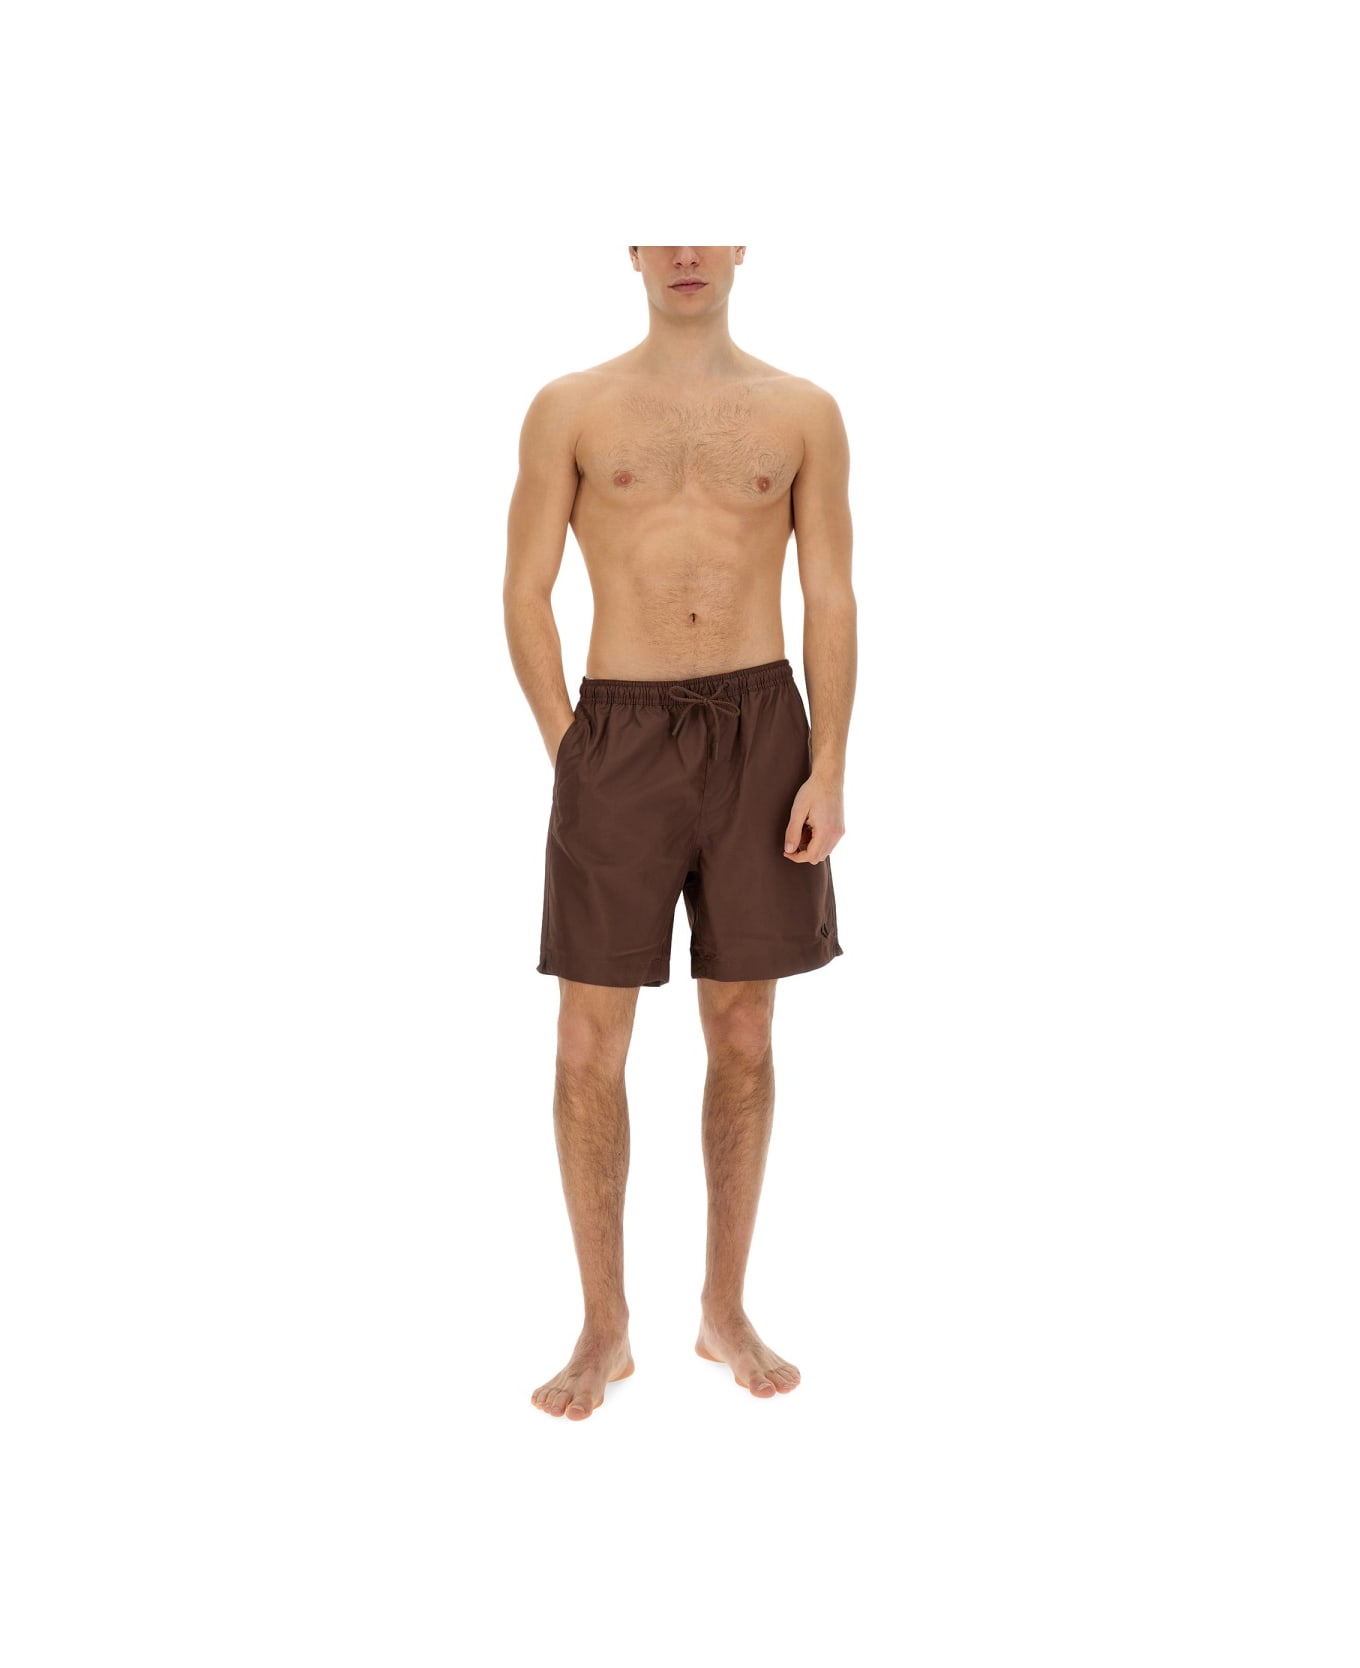 Fred Perry Swimsuit - BROWN 水着